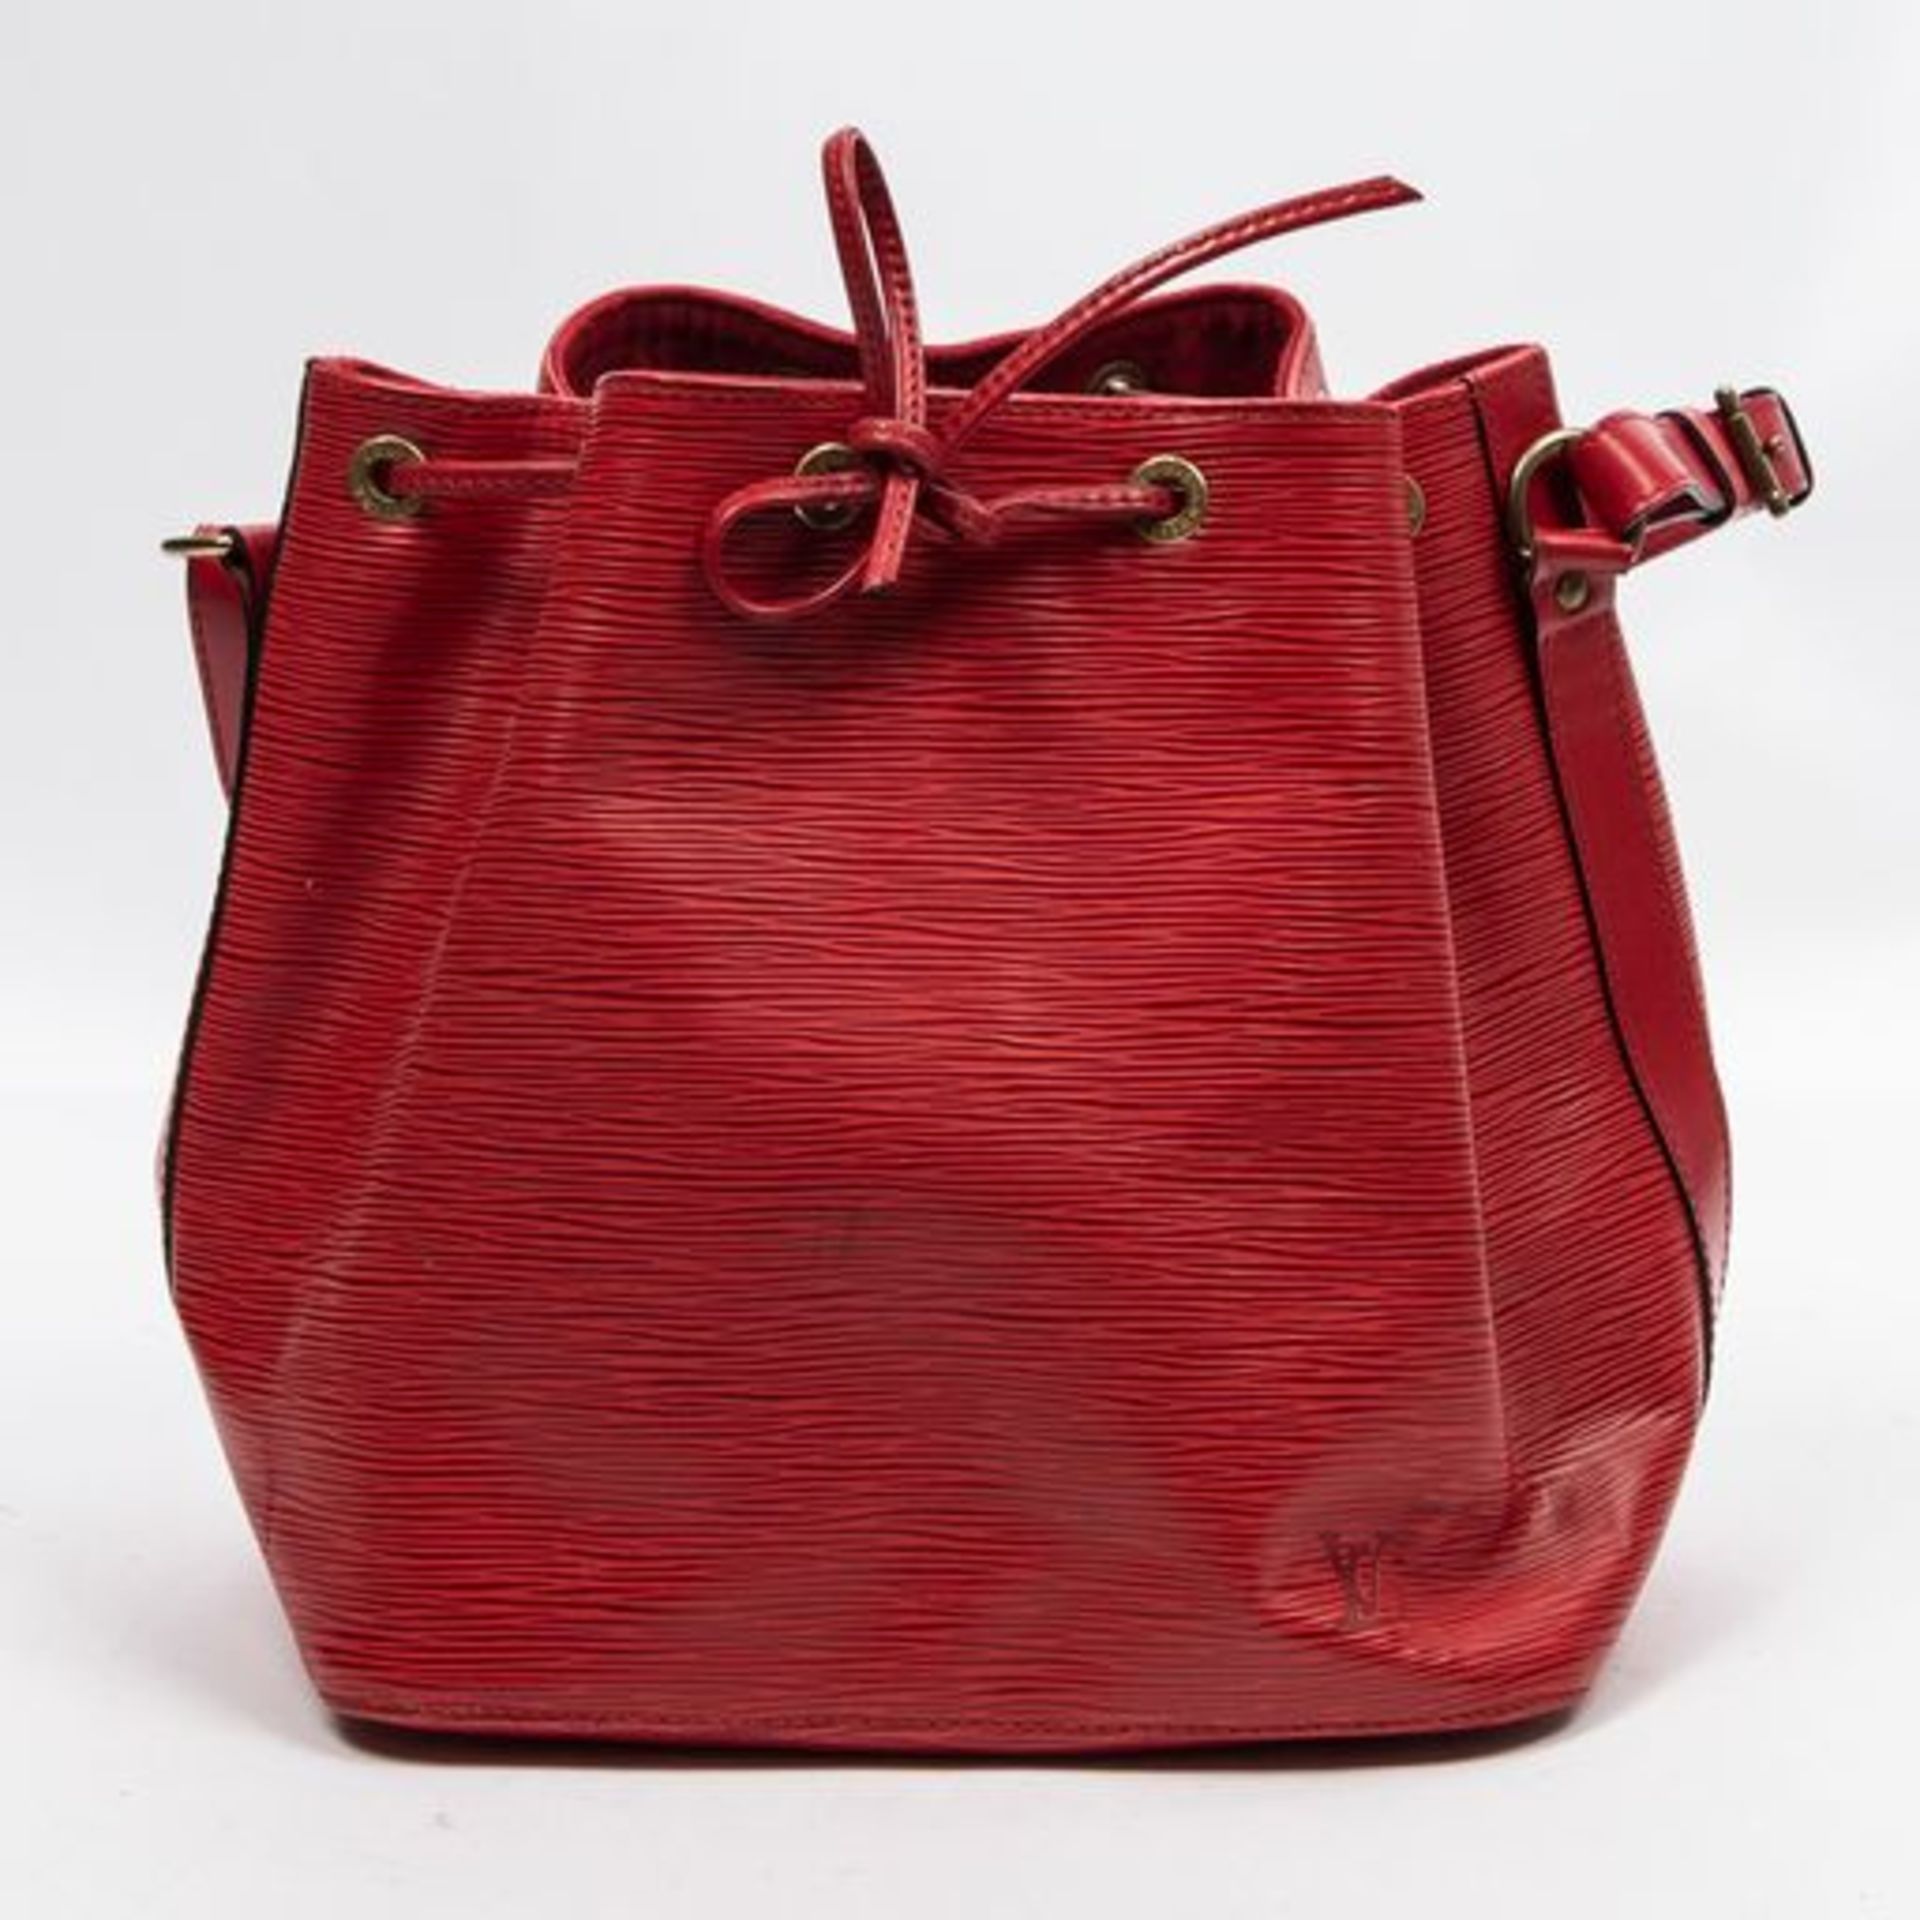 RRP £1450 Louis Vuitton Noe Shoulder Bag Red - AAR7789 - Grade A - (Bags Are Not On Site, Please